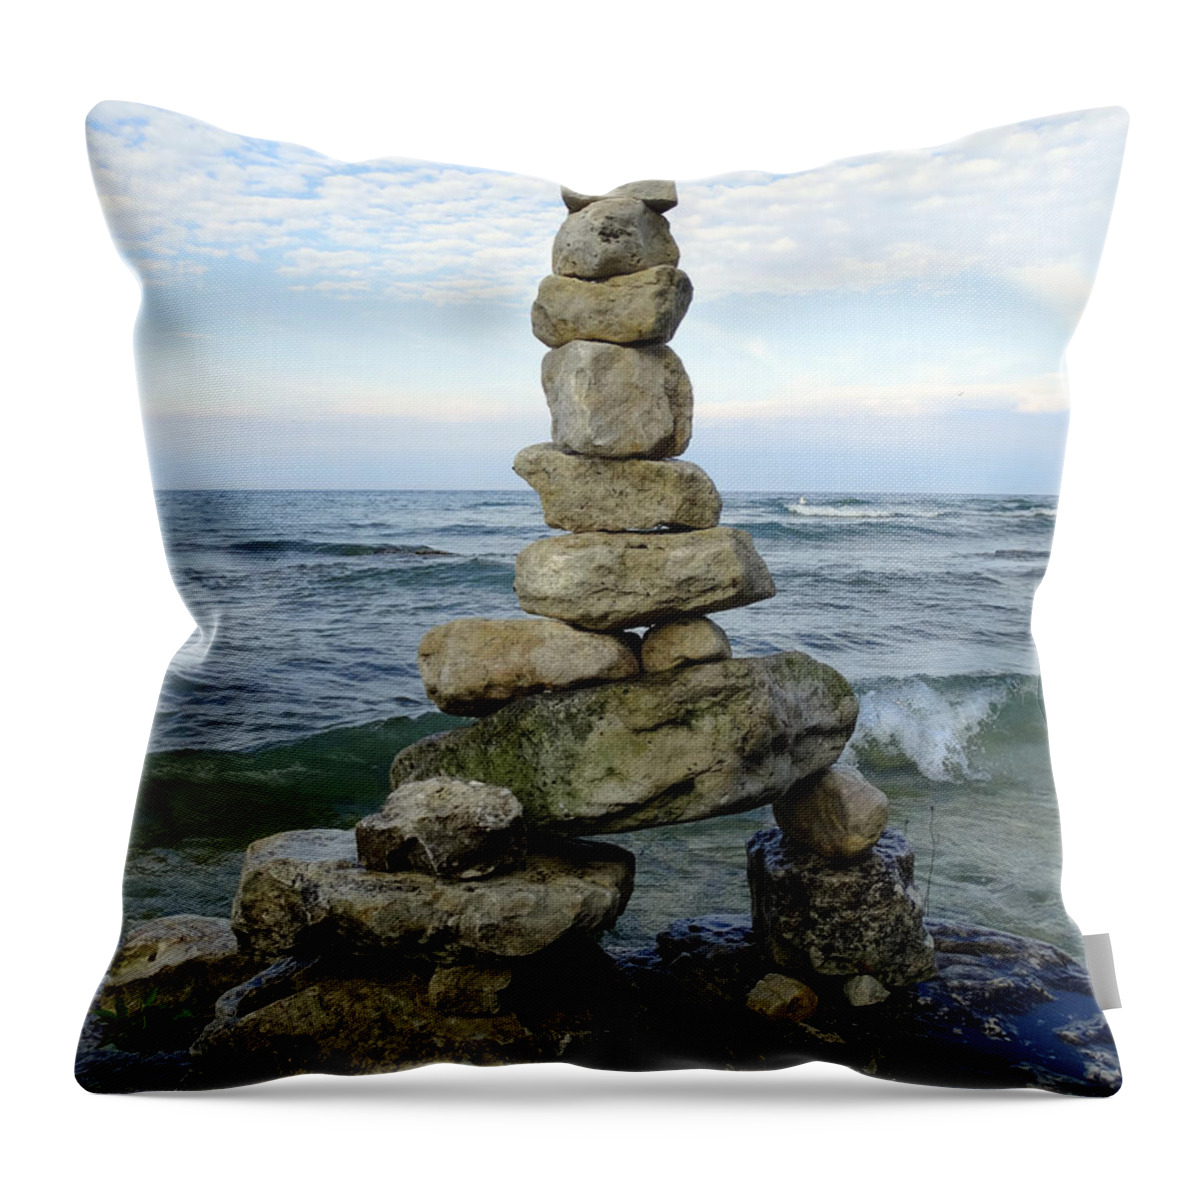 Stacked Stones Throw Pillow featuring the photograph Stacked Stones by David T Wilkinson